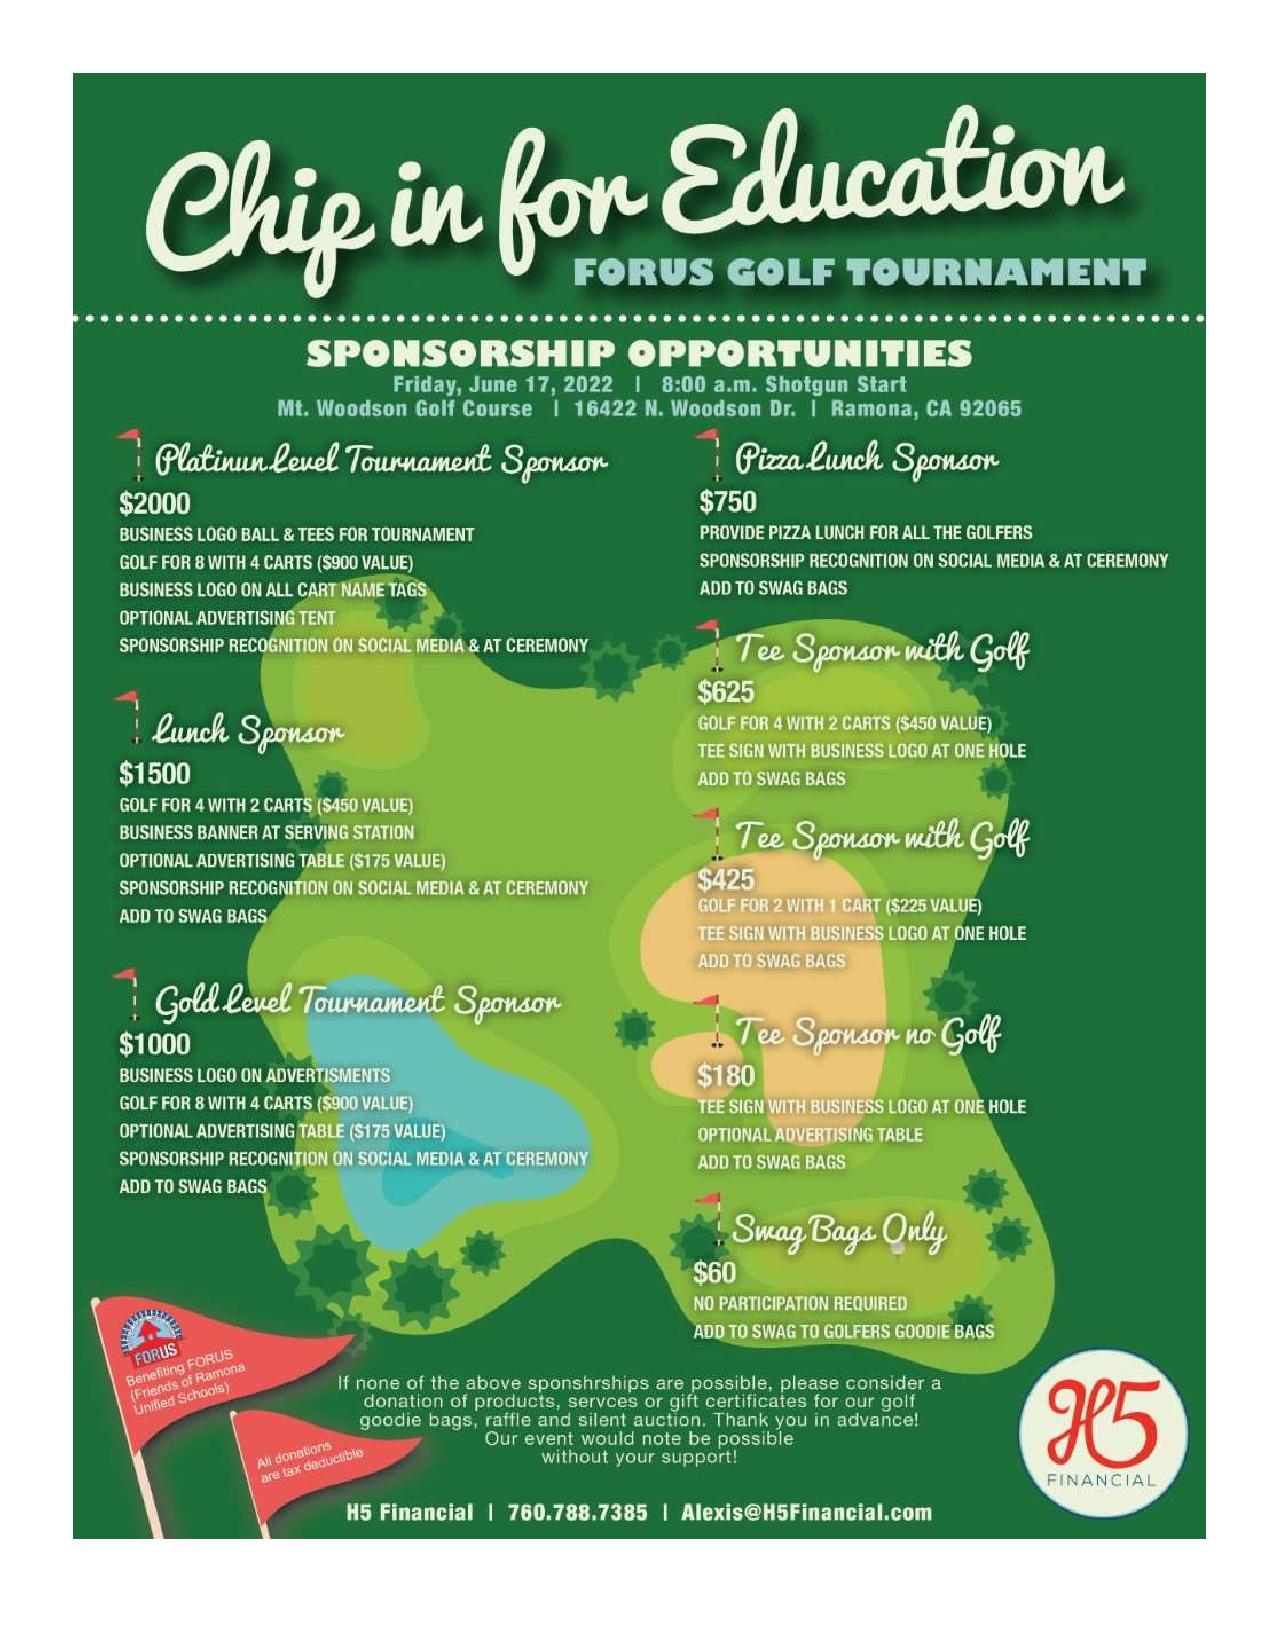 FORUS Chip in for Education Golf Tournament Mt Woodson Golf